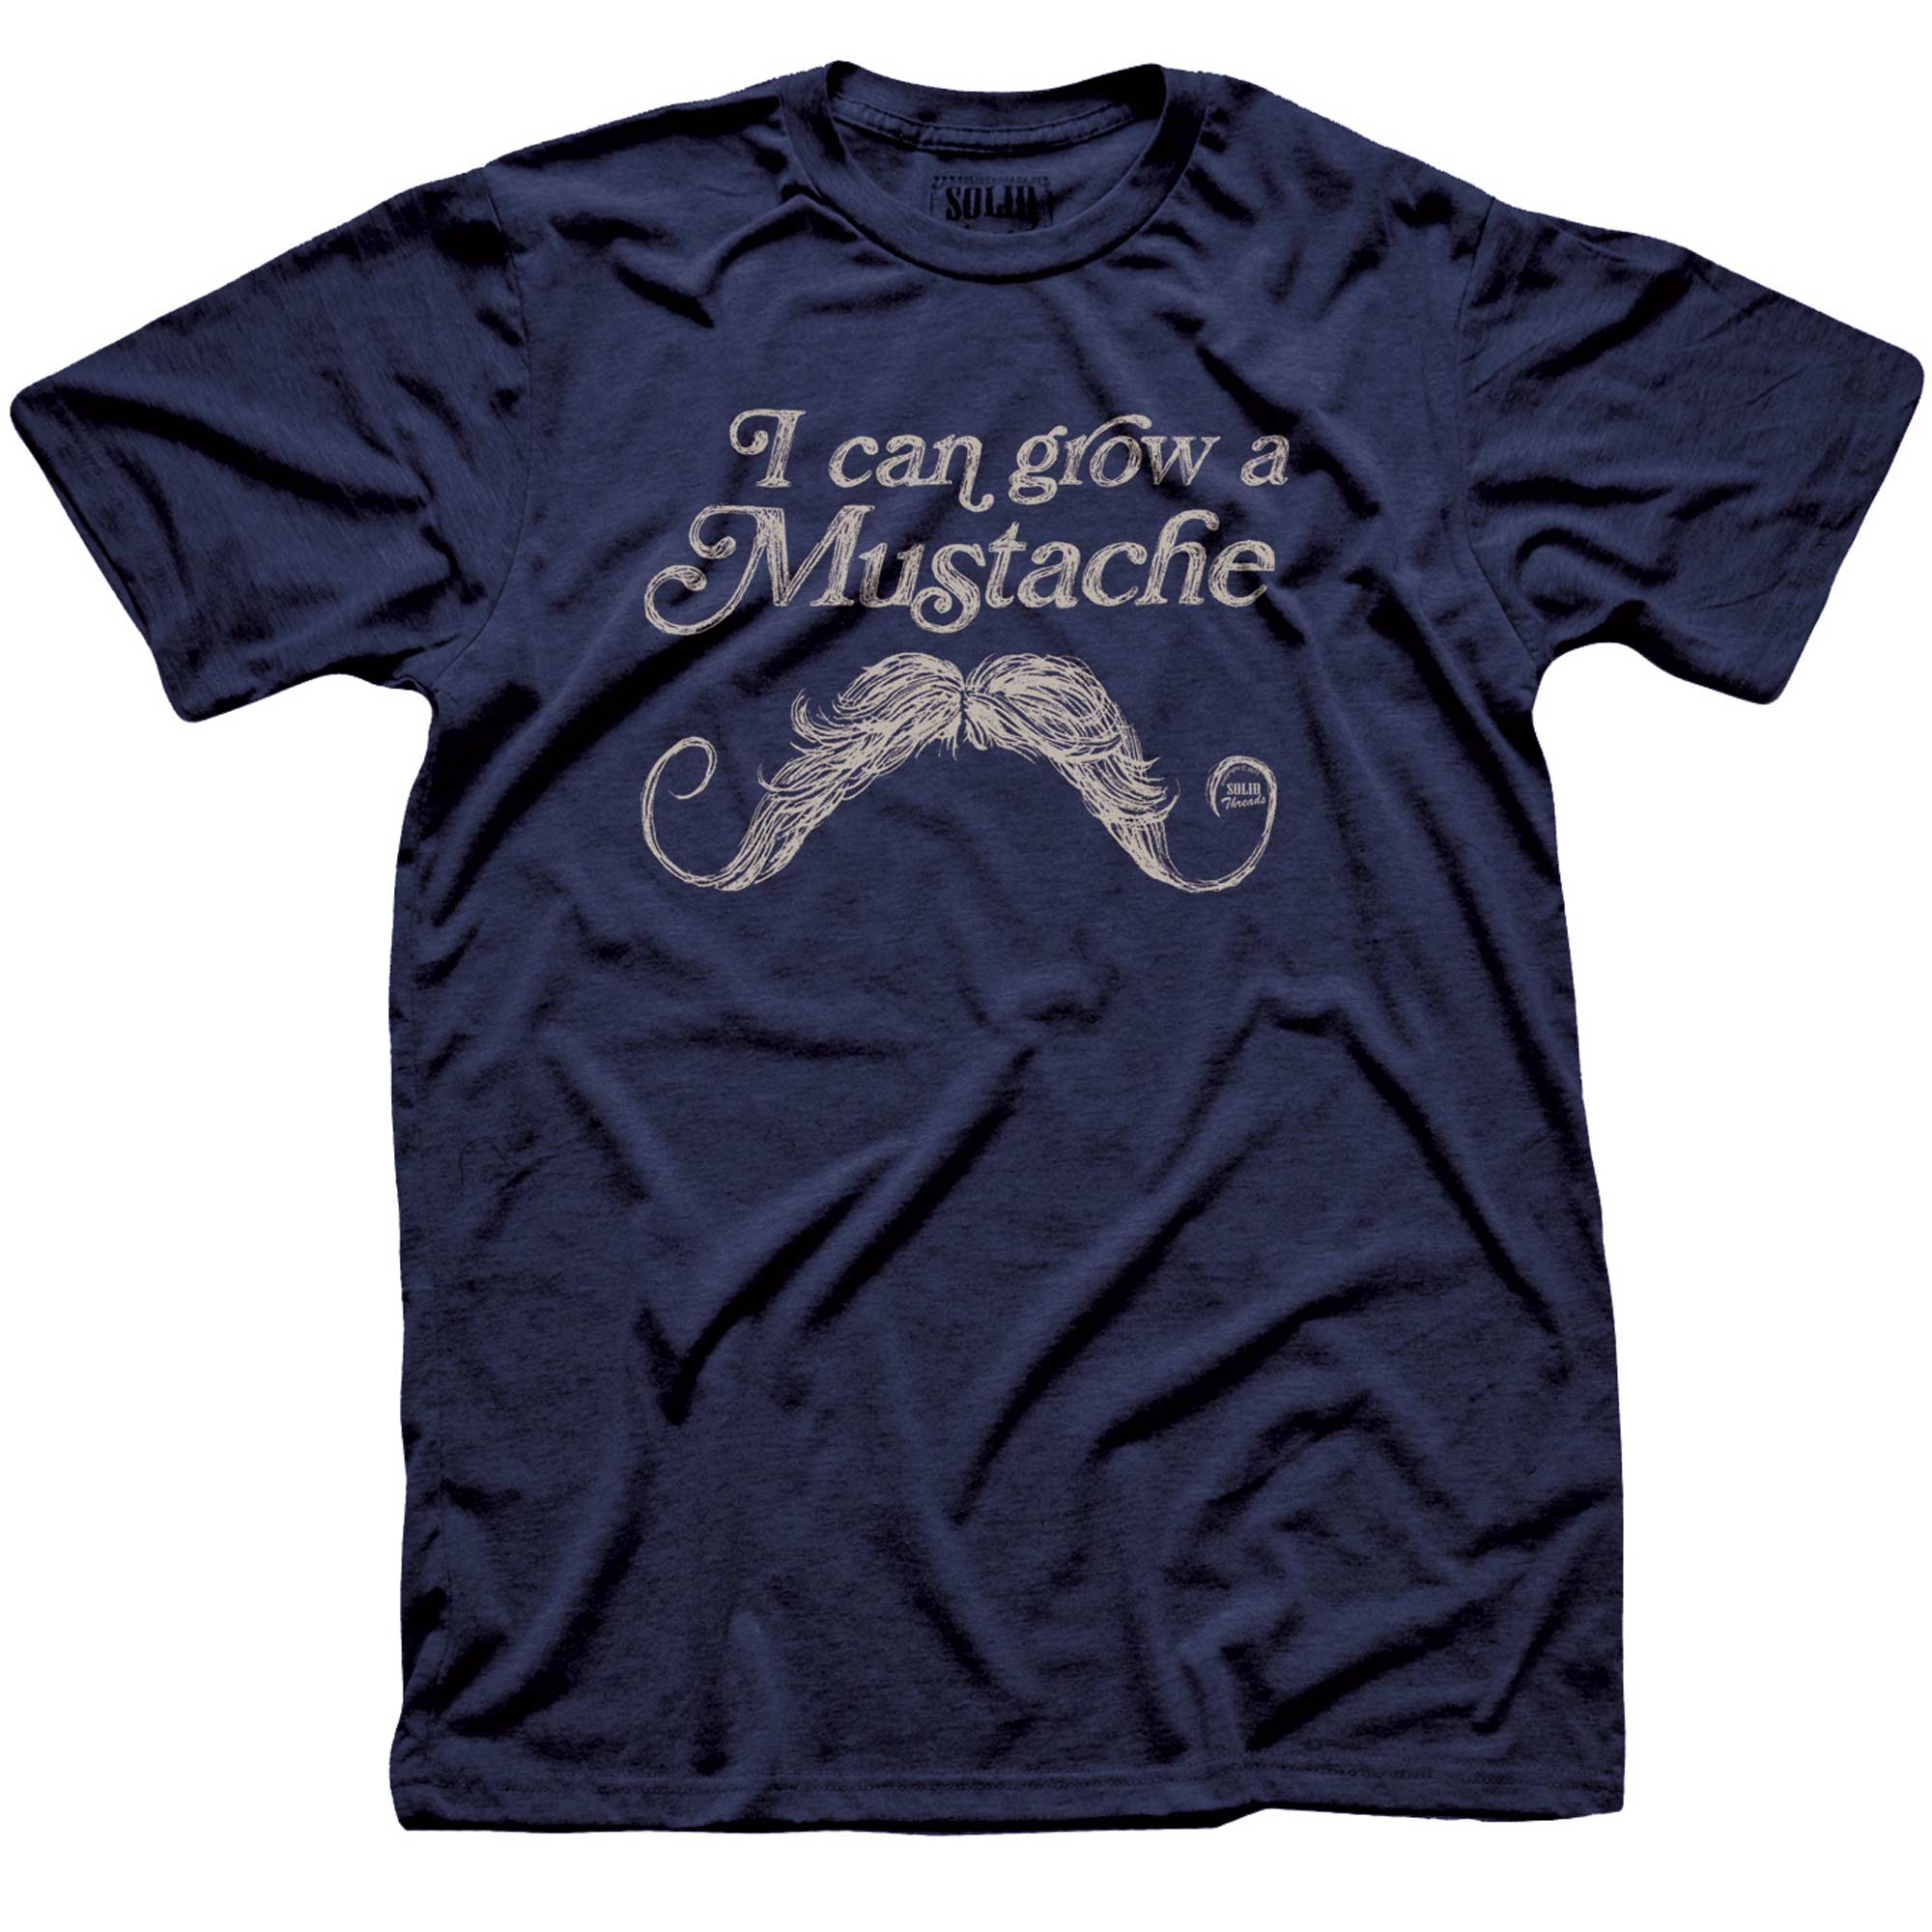 Men's I Can Grow A Mustache Vintage Graphic T-Shirt | Funny Hipster Navy Tee | Solid Threads